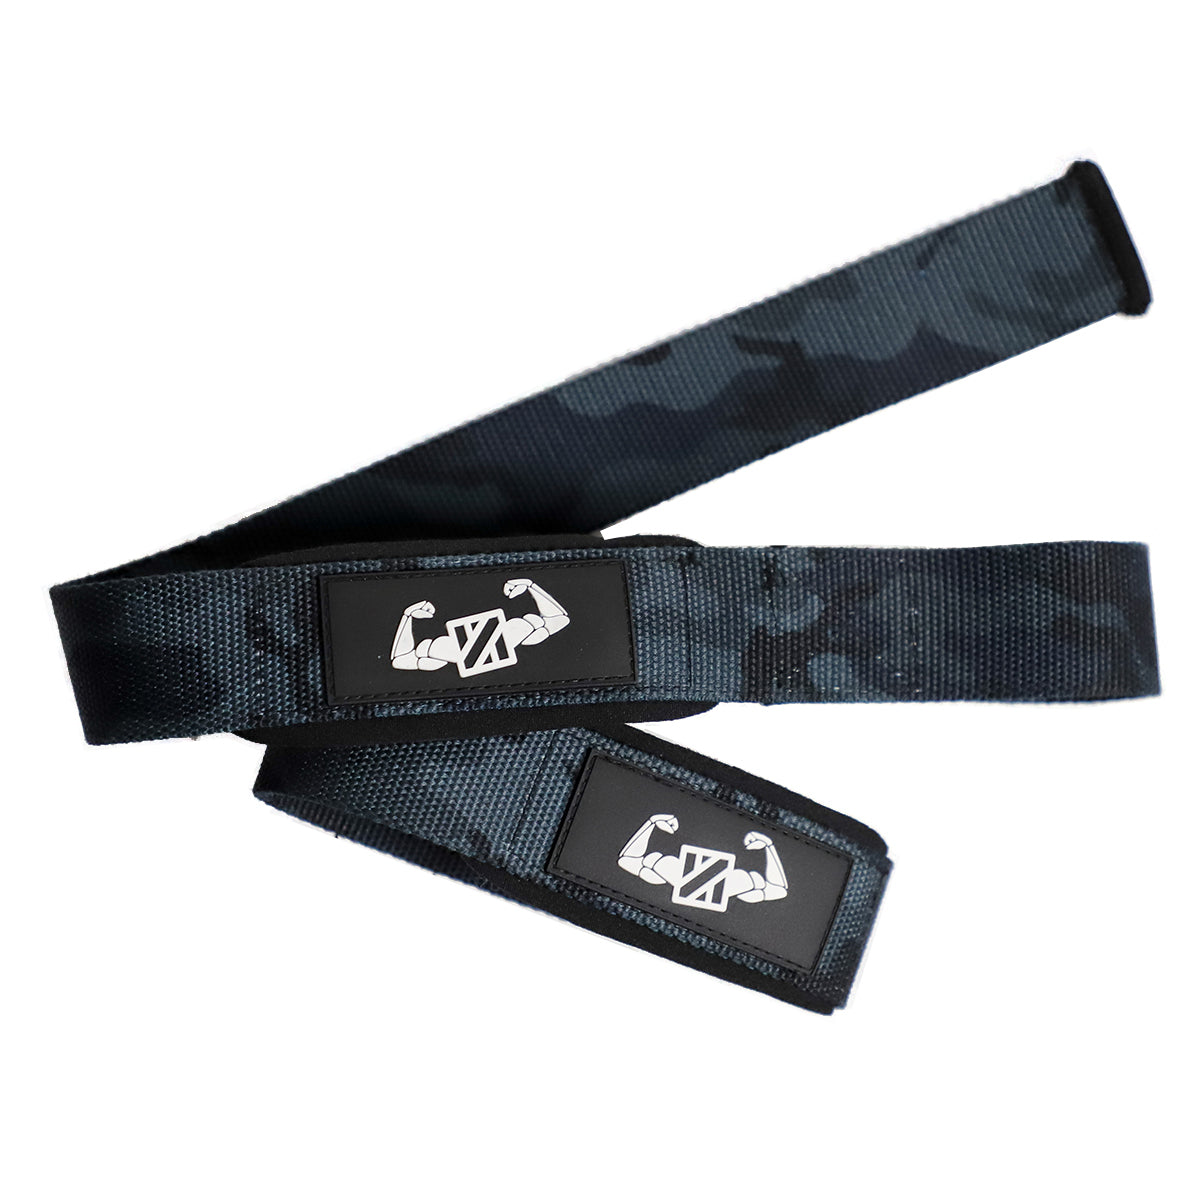 Muscle Crate - Lifting Straps - Dark Camo